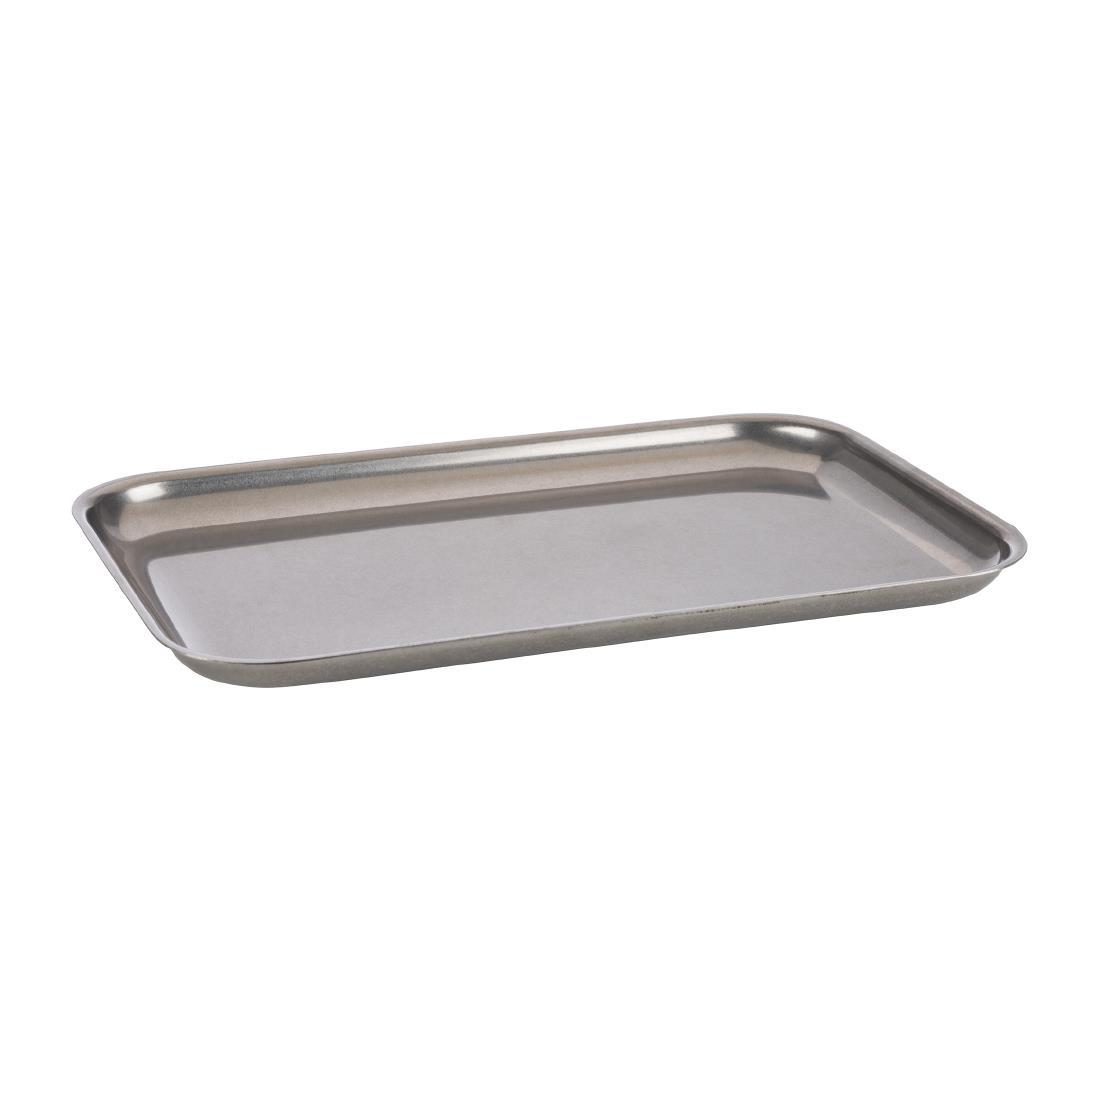 APS Vintage Tray 32 x 215mm - FT170  - 1